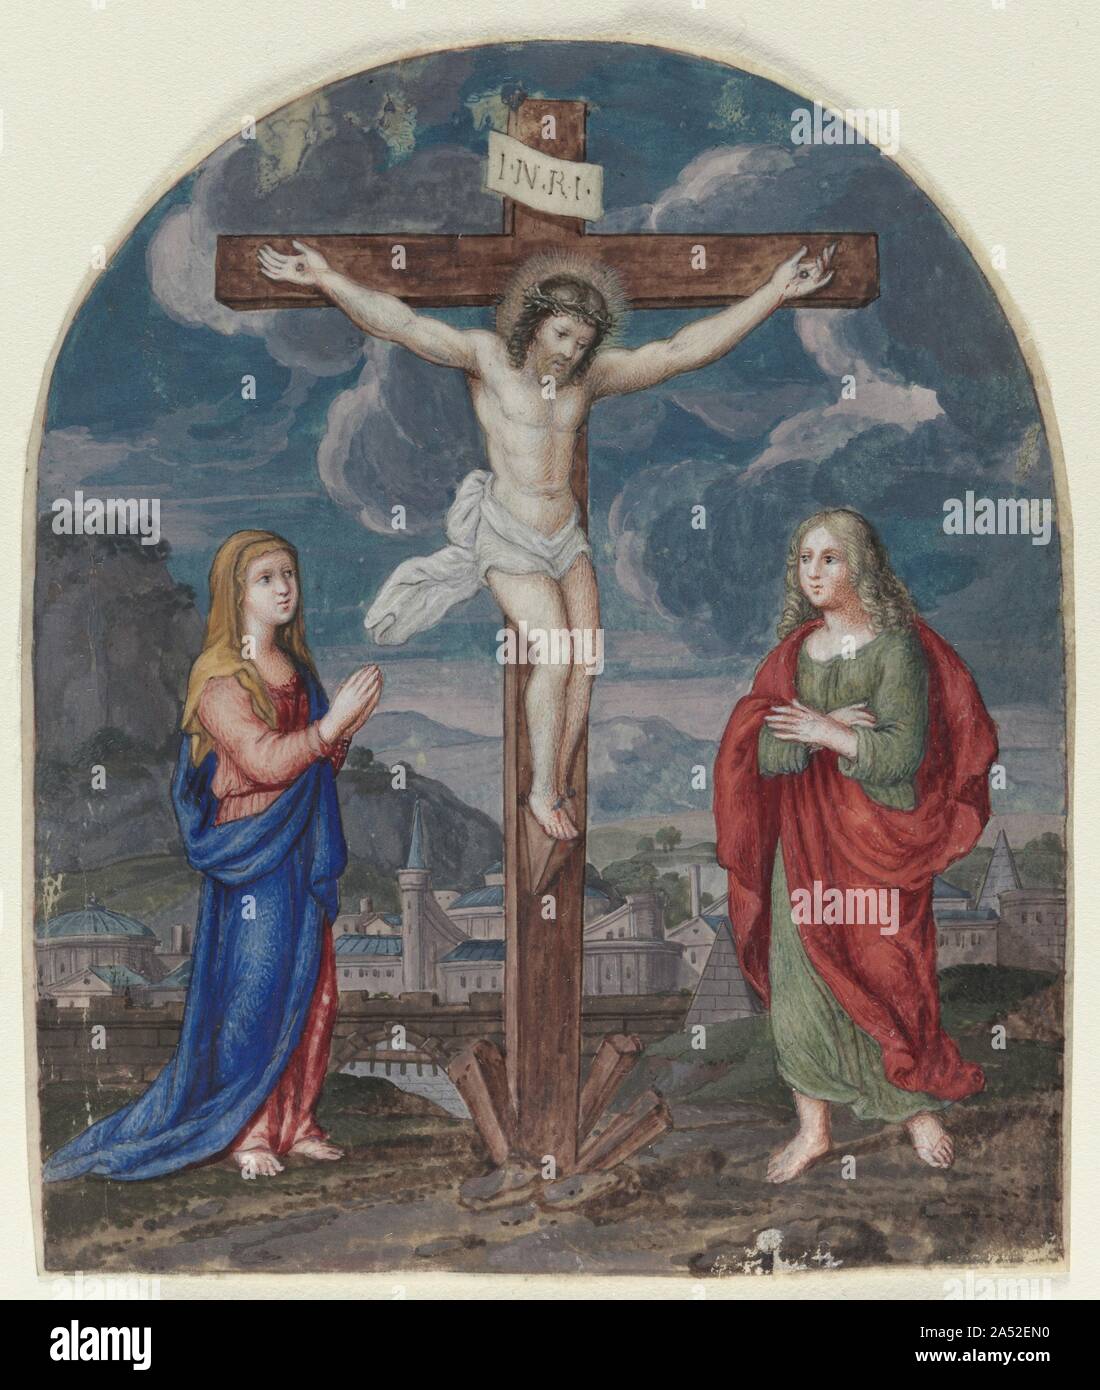 The Crucifixion: Miniature Excised from a Prayer Book, c. 1540-1550. The illuminator is unknown, but his style seems to conform to that known as &quot;Antwerp Mannerism.&quot; It emerged among a group of Antwerp painters during the first half of the 1500s. Bolstered by its rich trade and cultural contacts, the port city of Antwerp attracted hundreds of artists-many of them from northern France, the Rhineland, and especially Holland-who joined the local painters&#x2019; Guild of Saint Luke, established large painting and sculpture workshops, and fed an expanding market for the production and ex Stock Photo